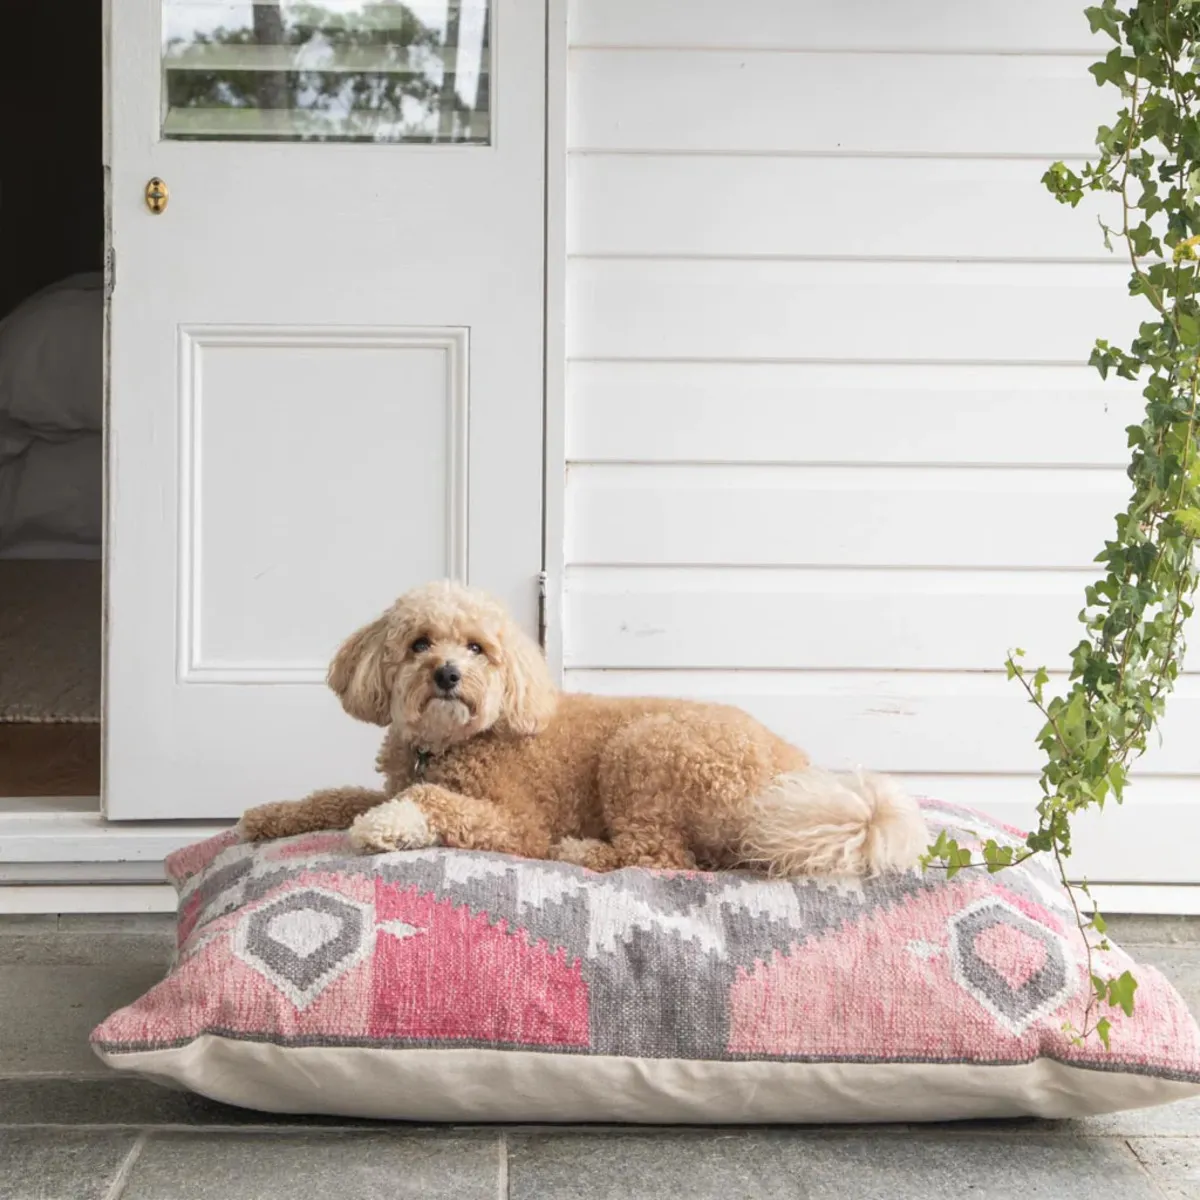 Cute dog lying on a large patterned floor cushion outside